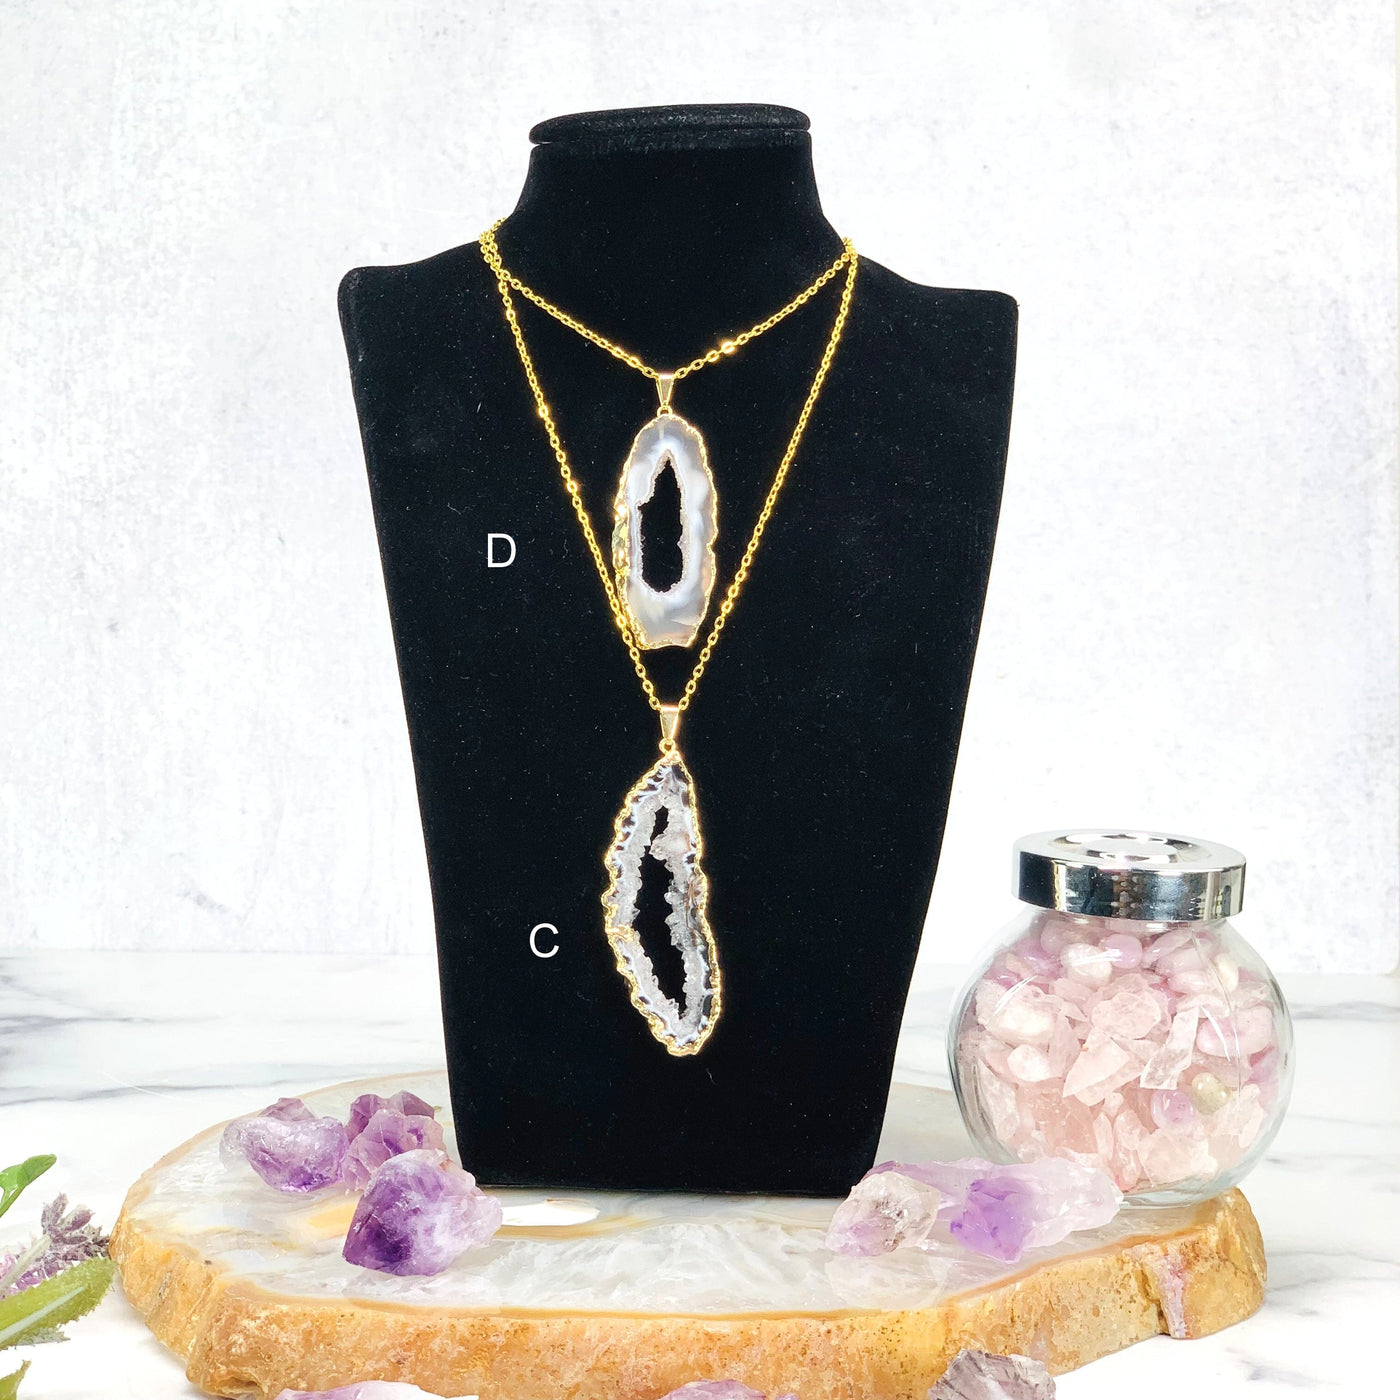 Display of 2 Agate Druzy Slice Pendant with Electroplated Gold Edge with chain on mannequin